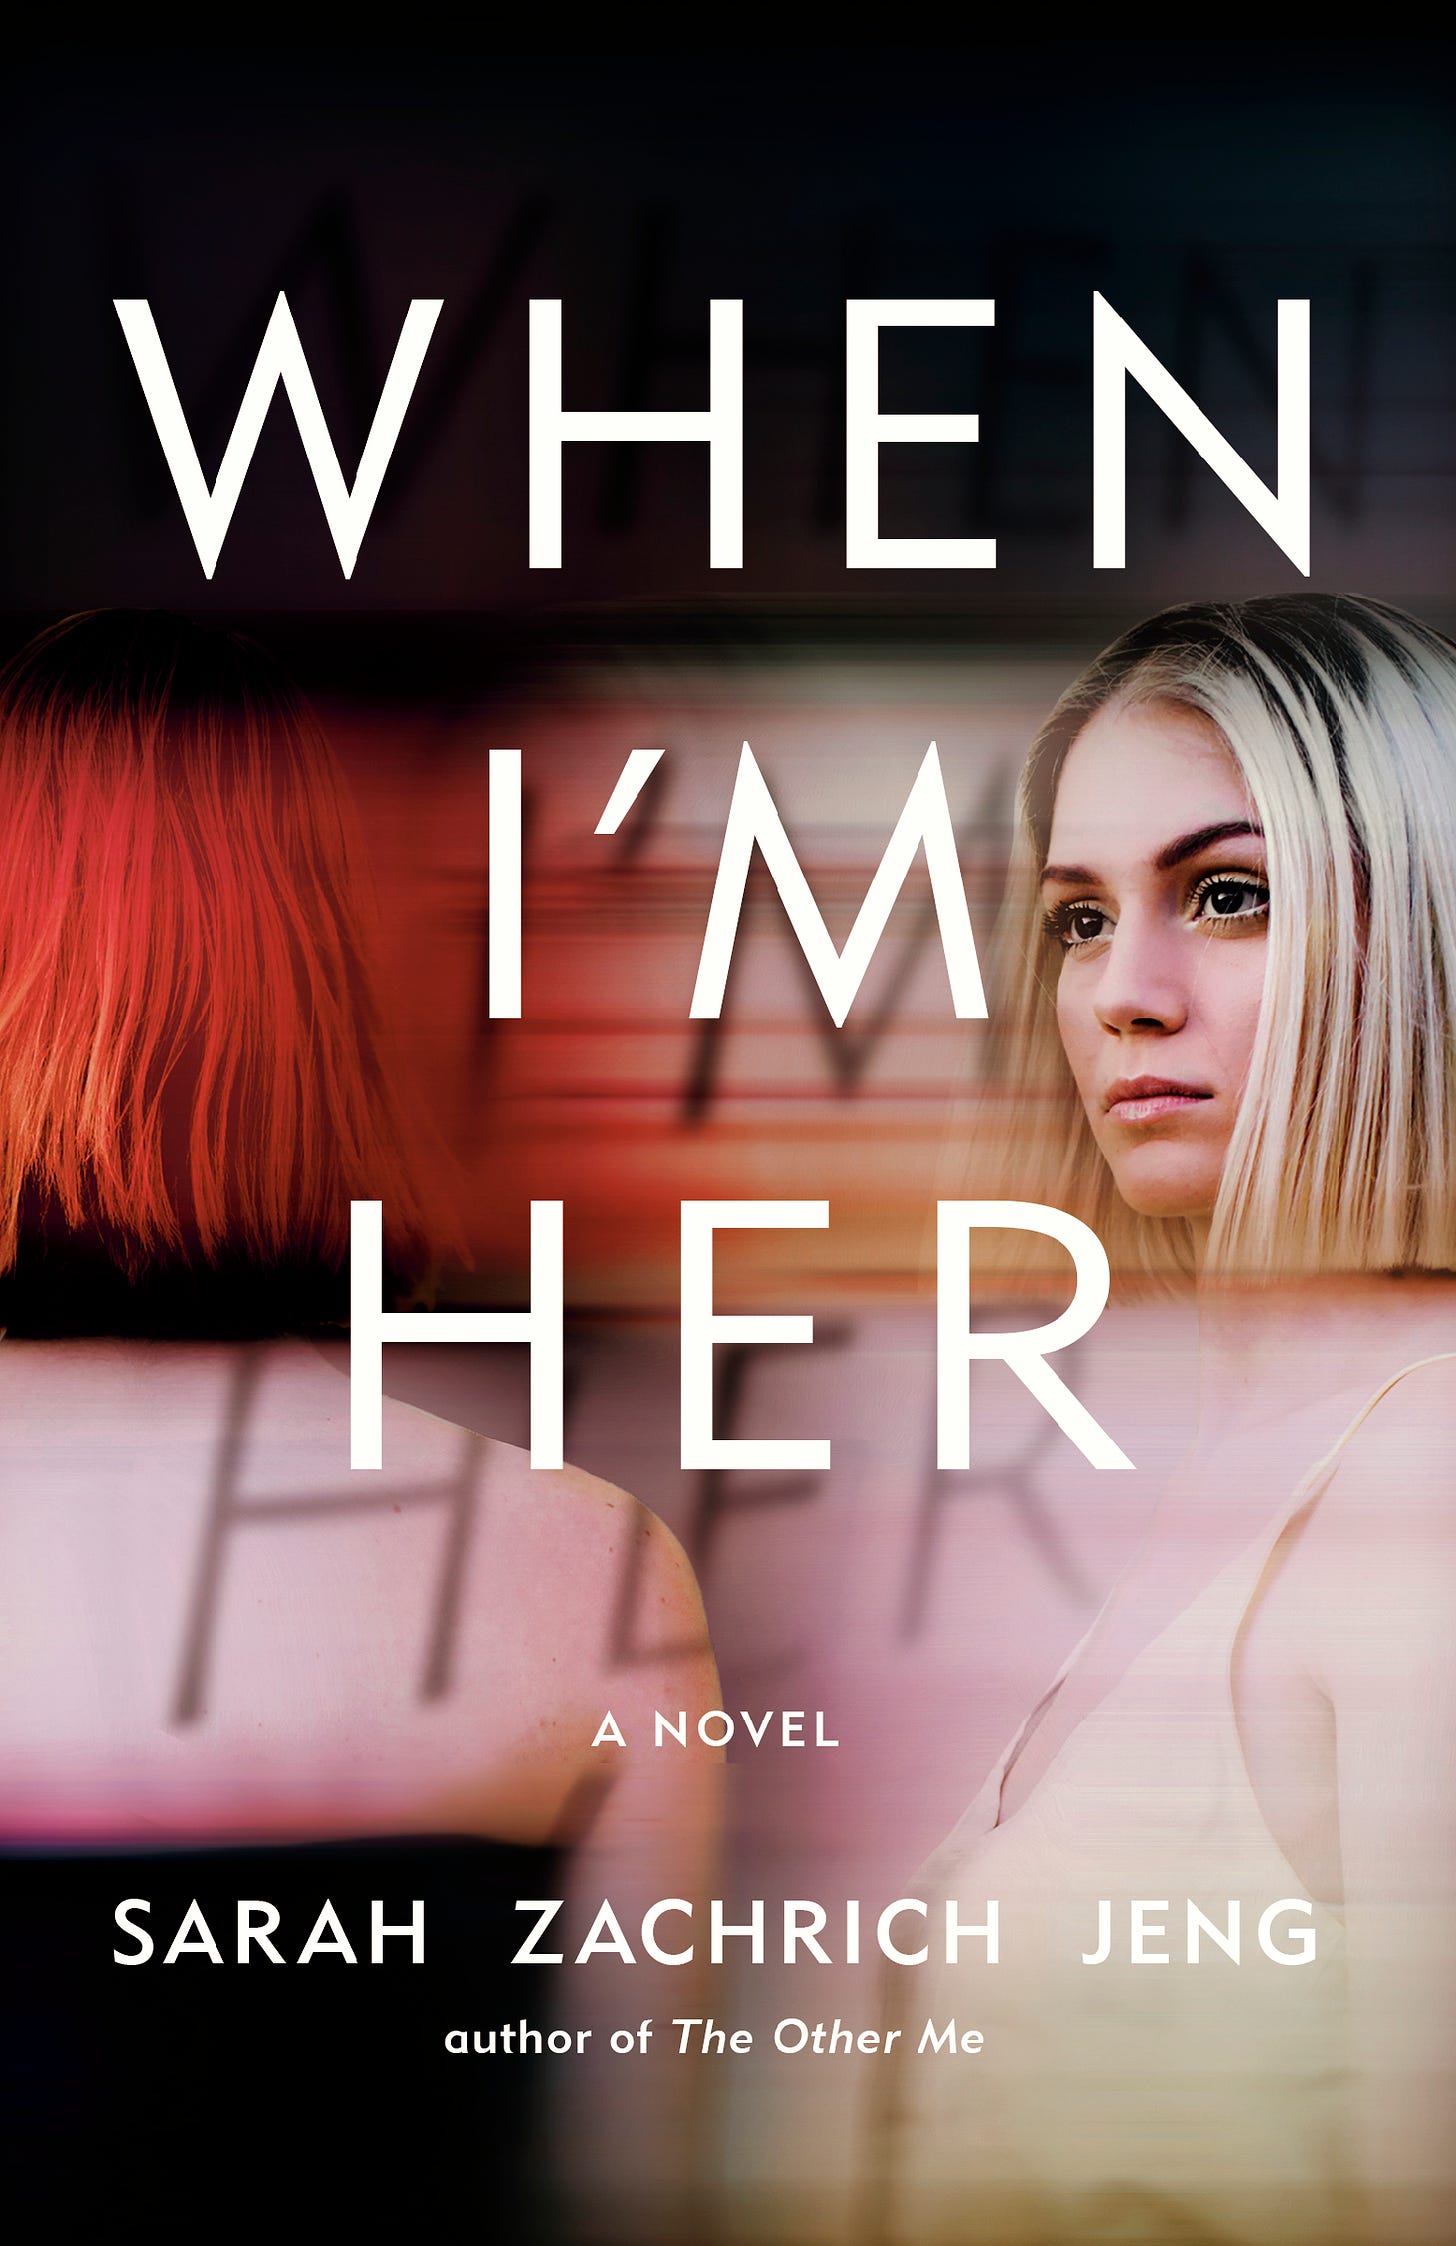 The cover for WHEN I’M HER  shows a woman with bobbed blond hair on the right, staring resentfully at another woman with red hair who has her back to the camera. White text reads “WHEN I’M HER: A NOVEL; SARAH ZACHRICH JENG; author of THE OTHER ME”